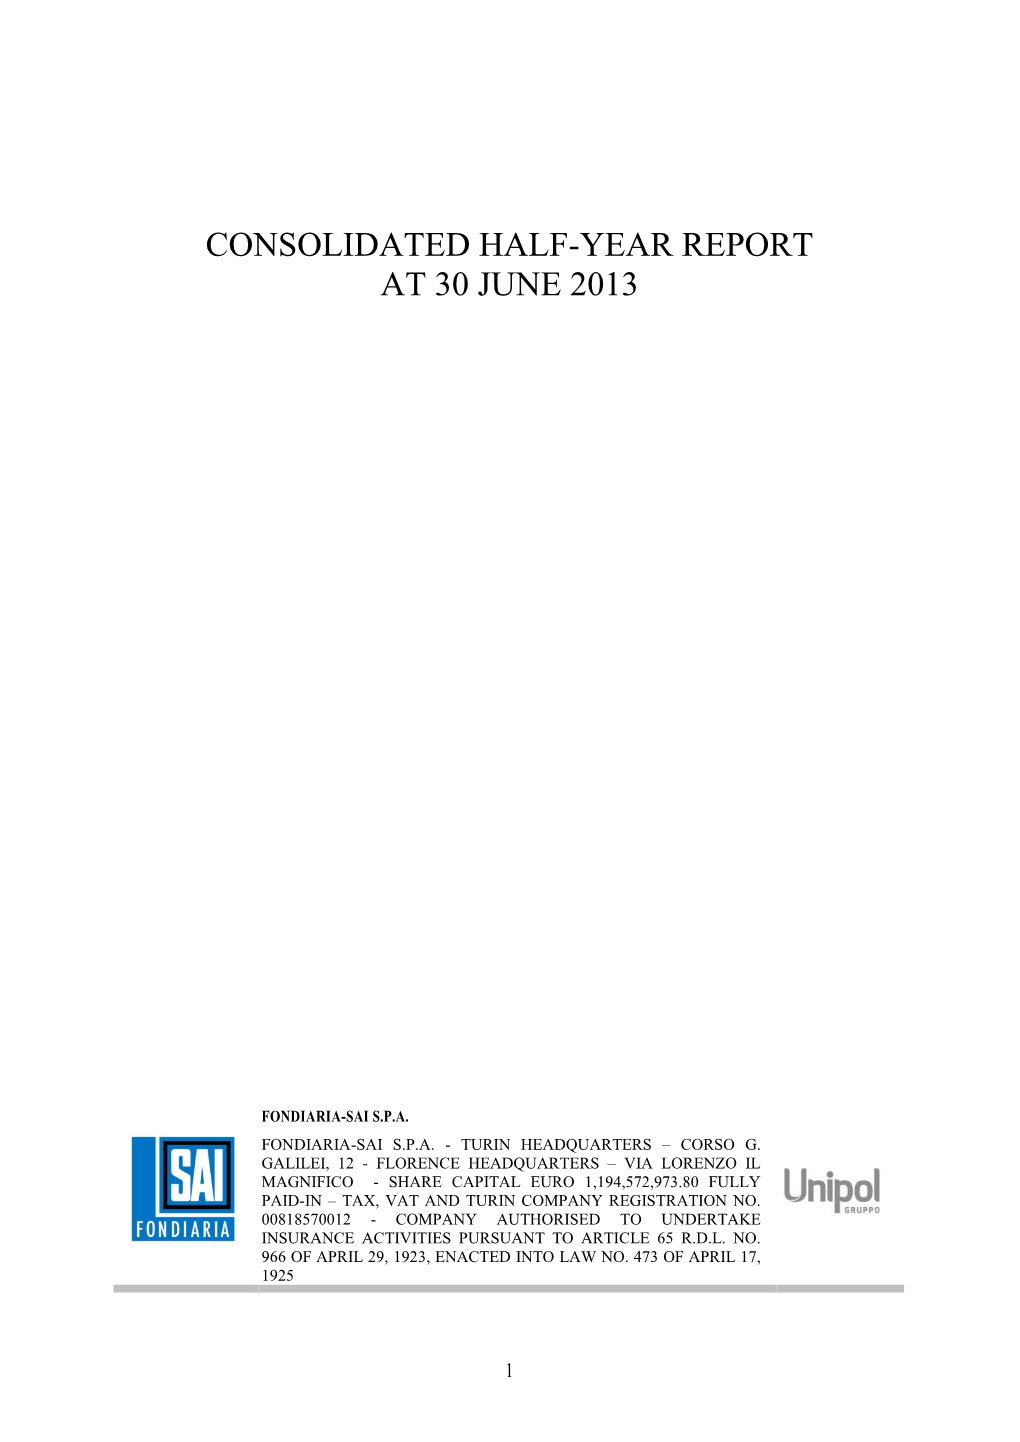 Consolidated Half-Year Report at 30 June 2013